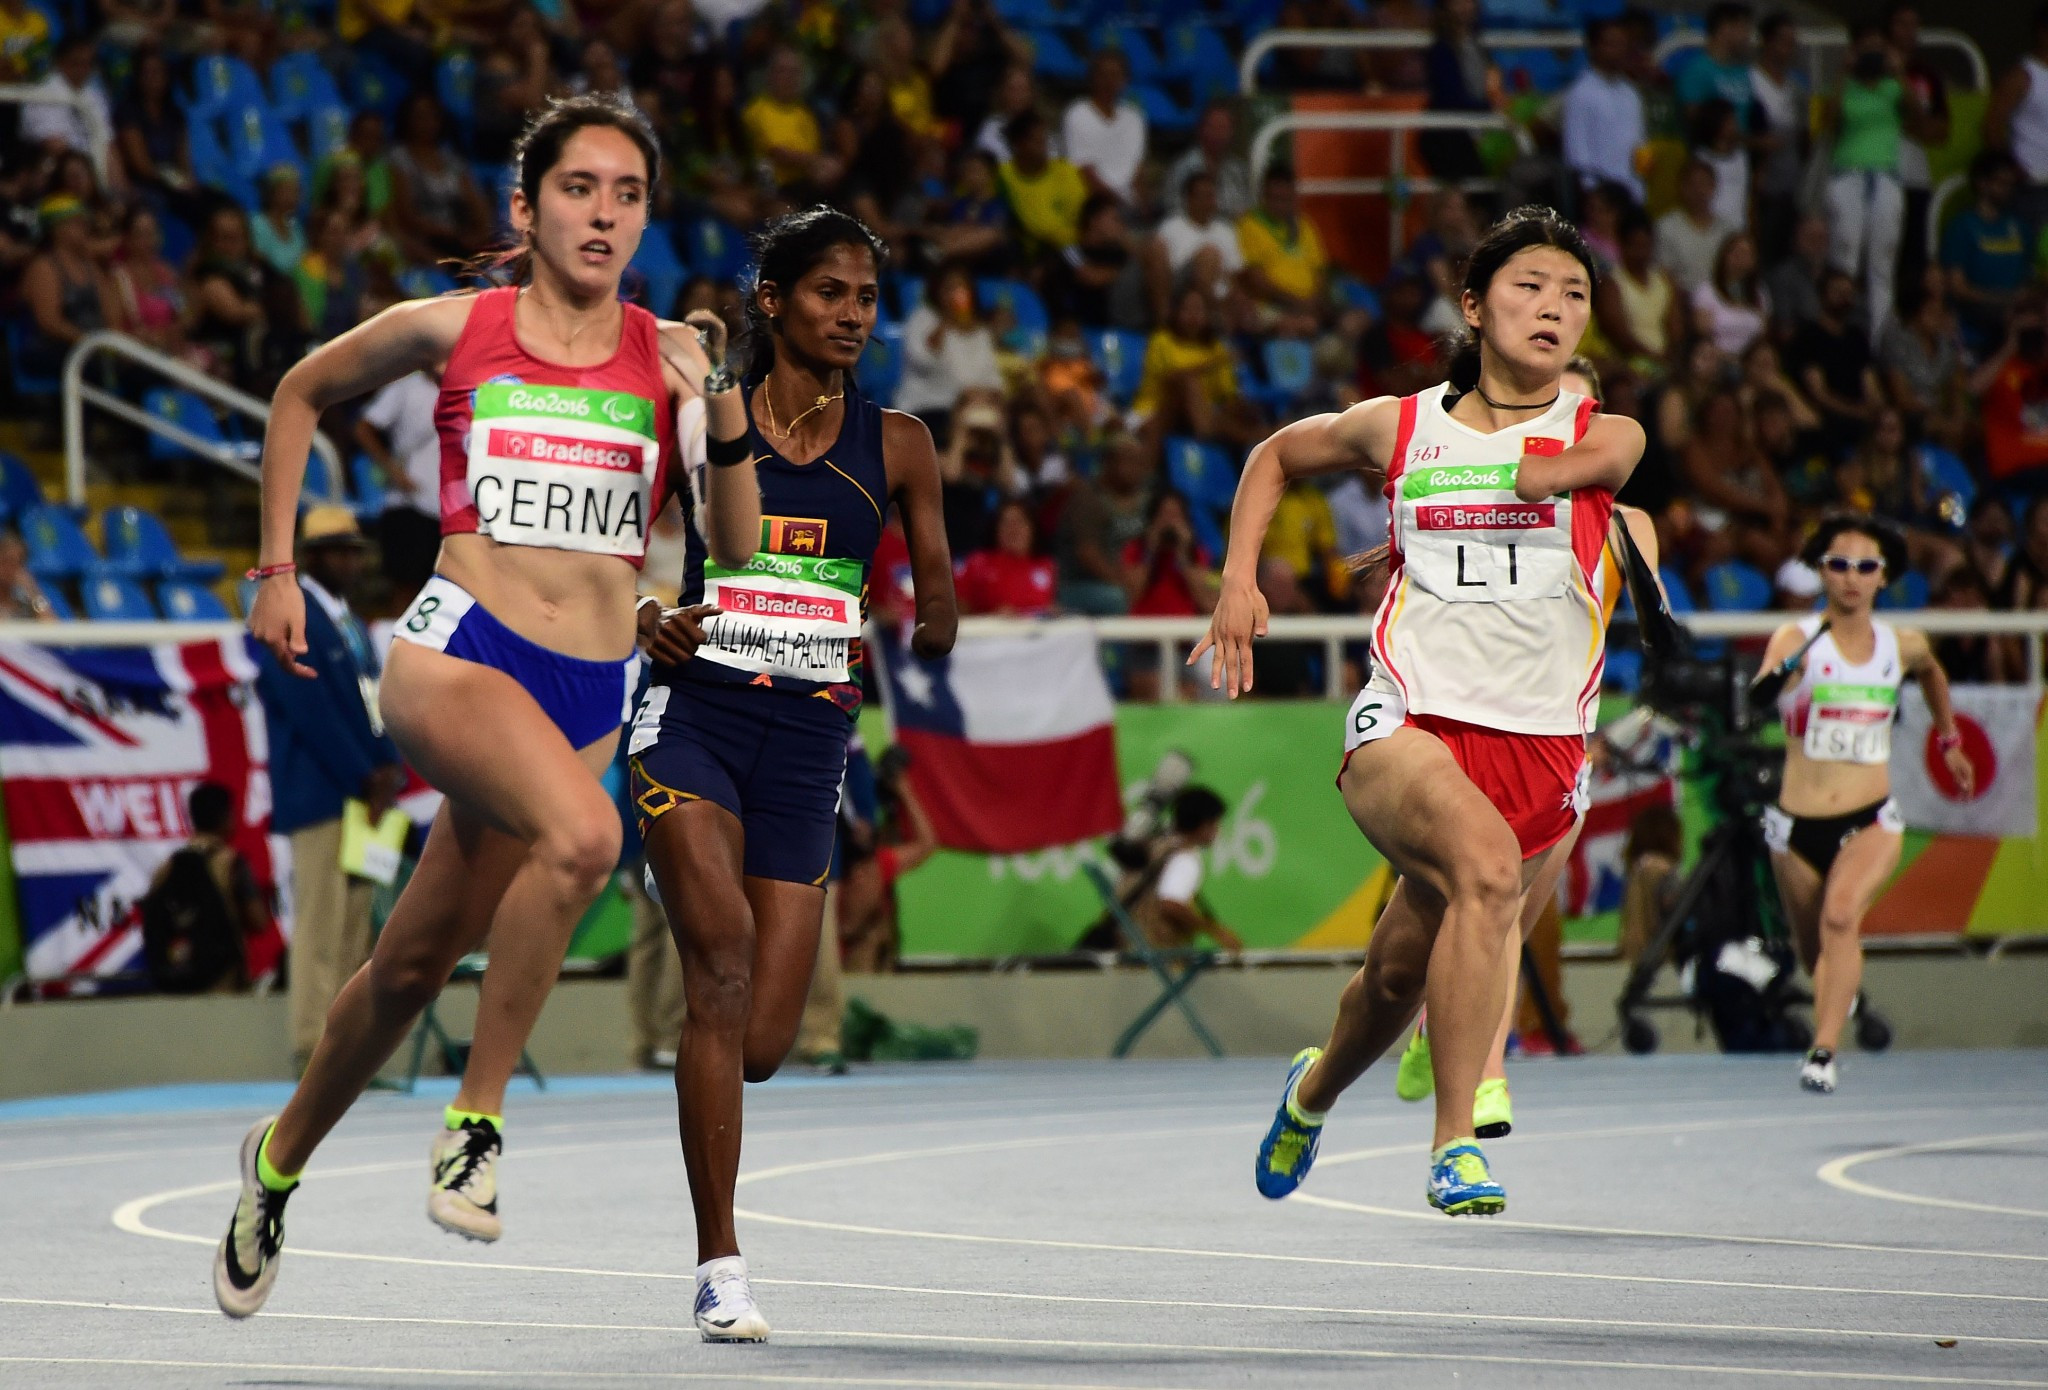 T47 sprinter Amanda Cerna of Chile is also set to compete in Nottwil ©Getty Images